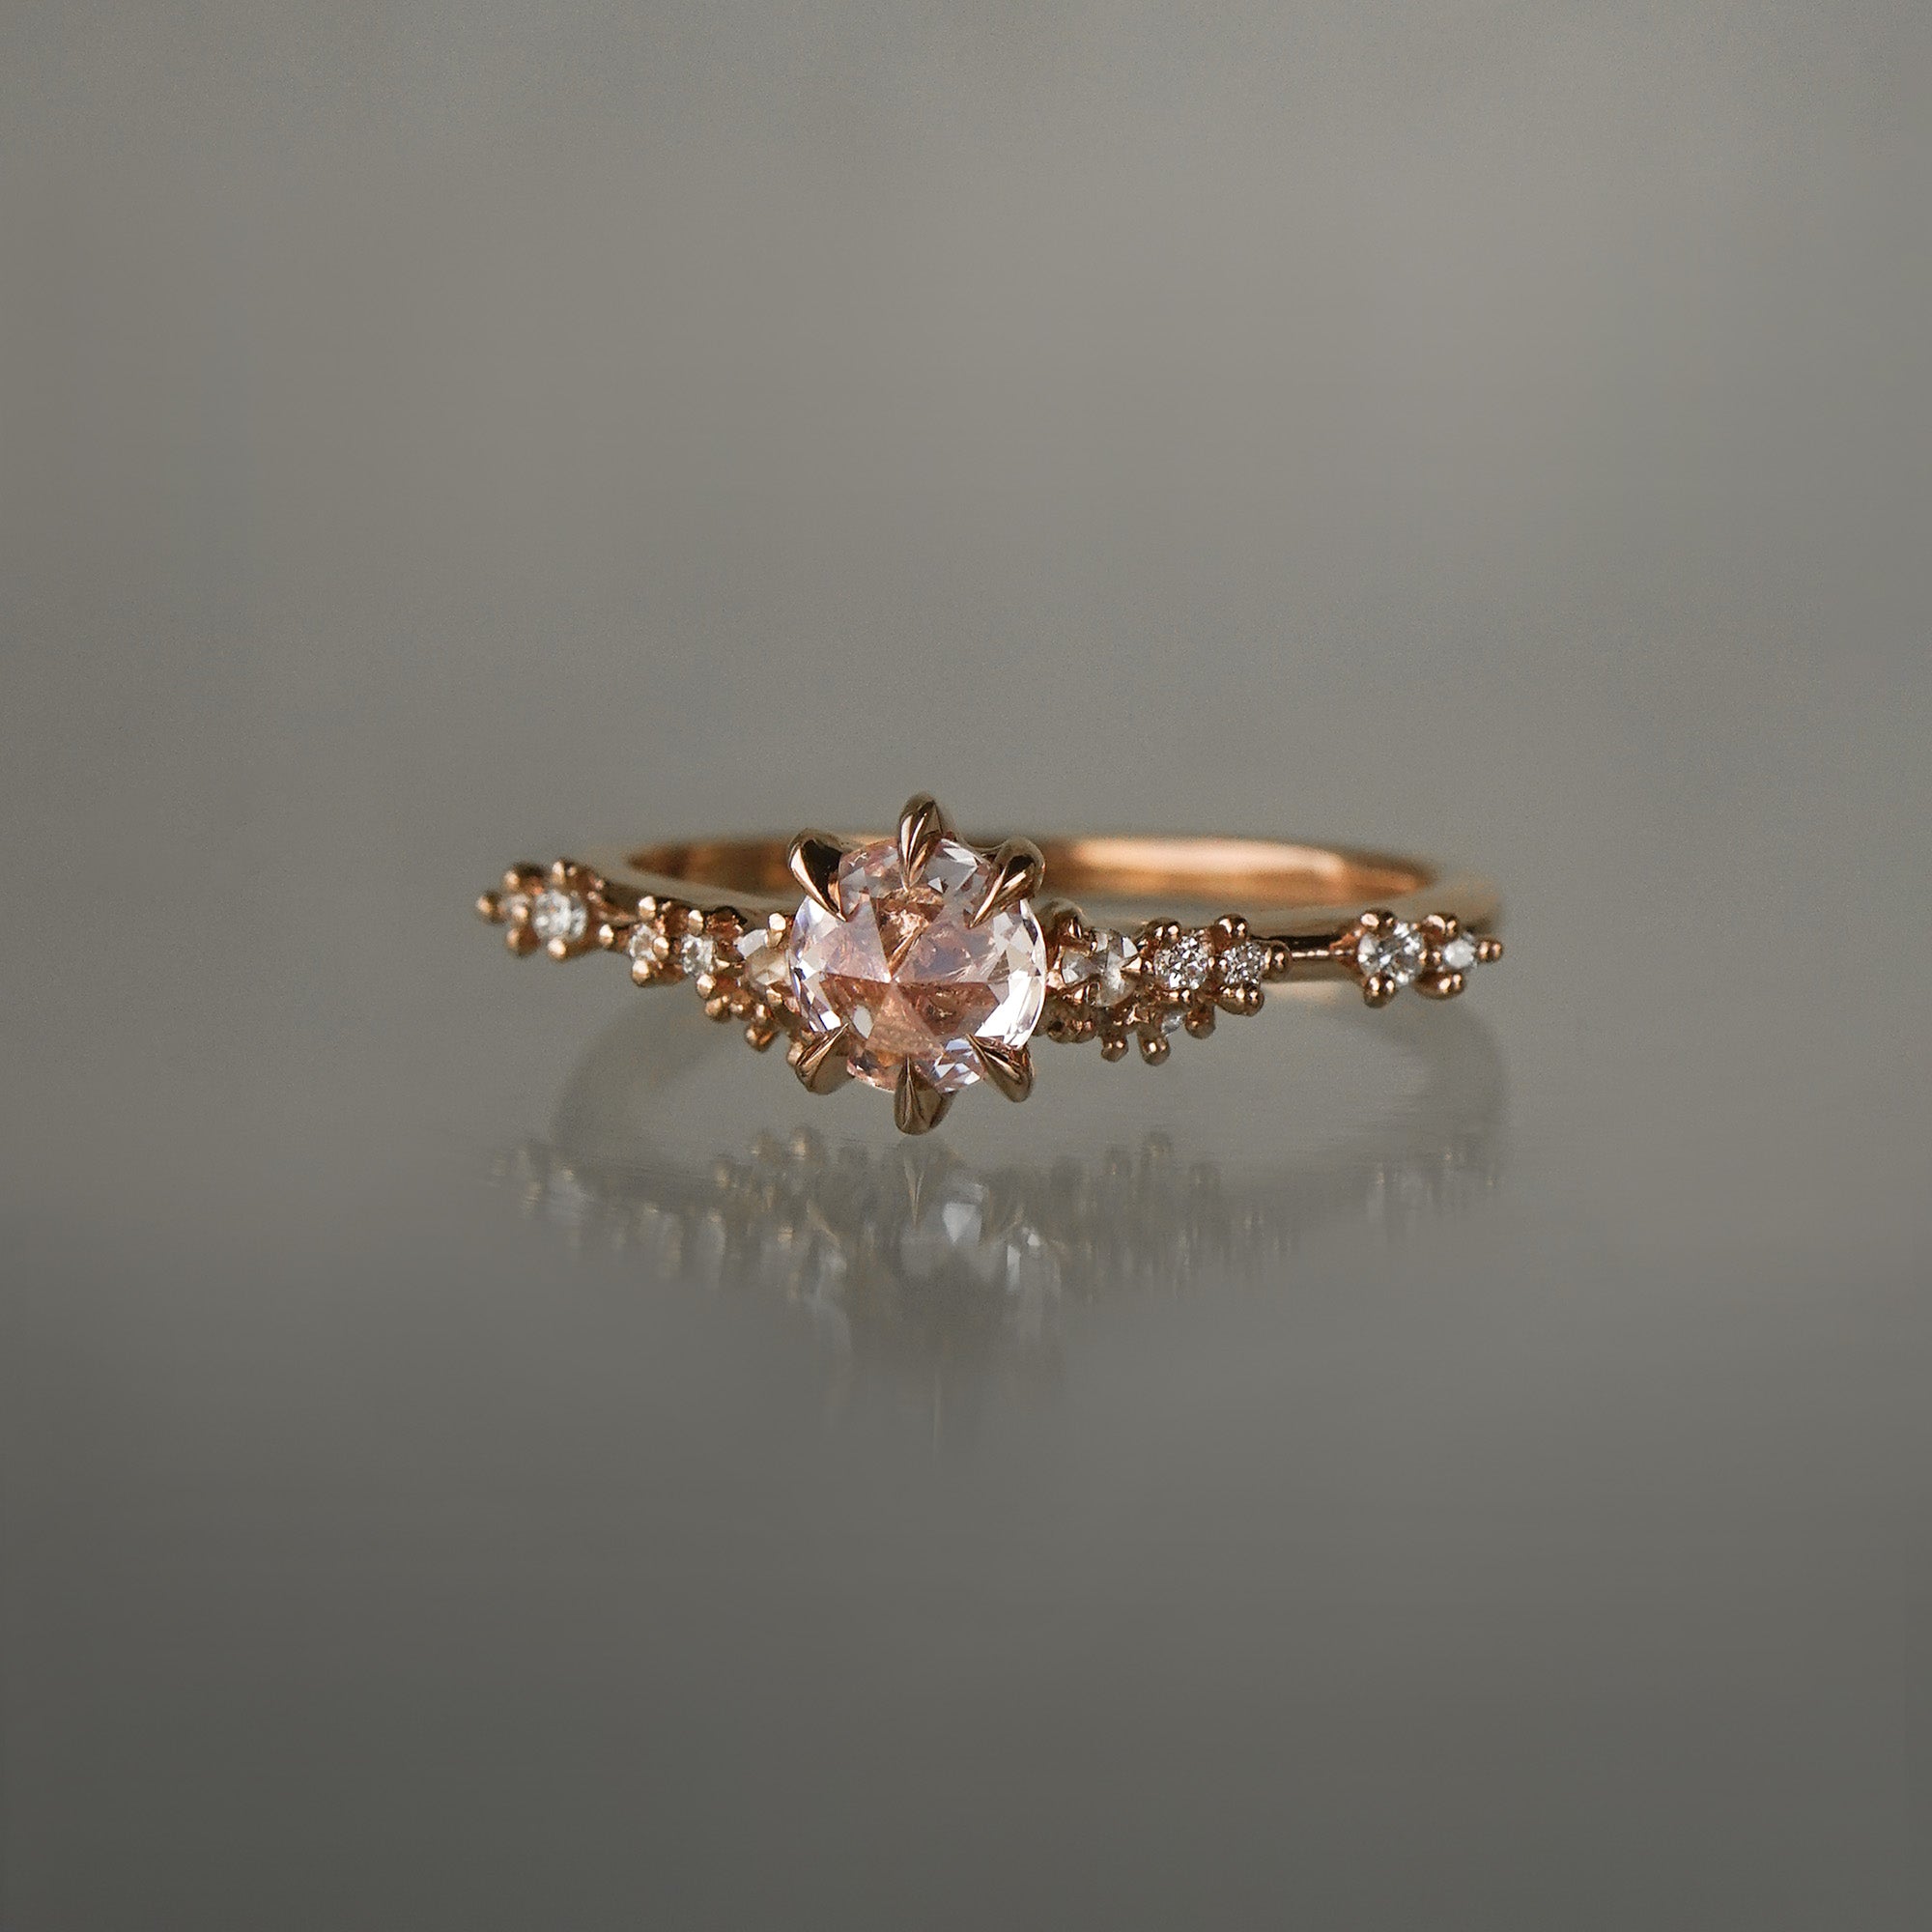 A delicate and ethereal hand-carved one of a kind "Daphne" style engagement ring by Laurie Fleming Jewellery. The ring features a rose cut pale pink sapphire centre, with clusters of rose and brilliant cut diamond accents on the band in solid 14k rose gold. The ring is situated against a medium grey background.